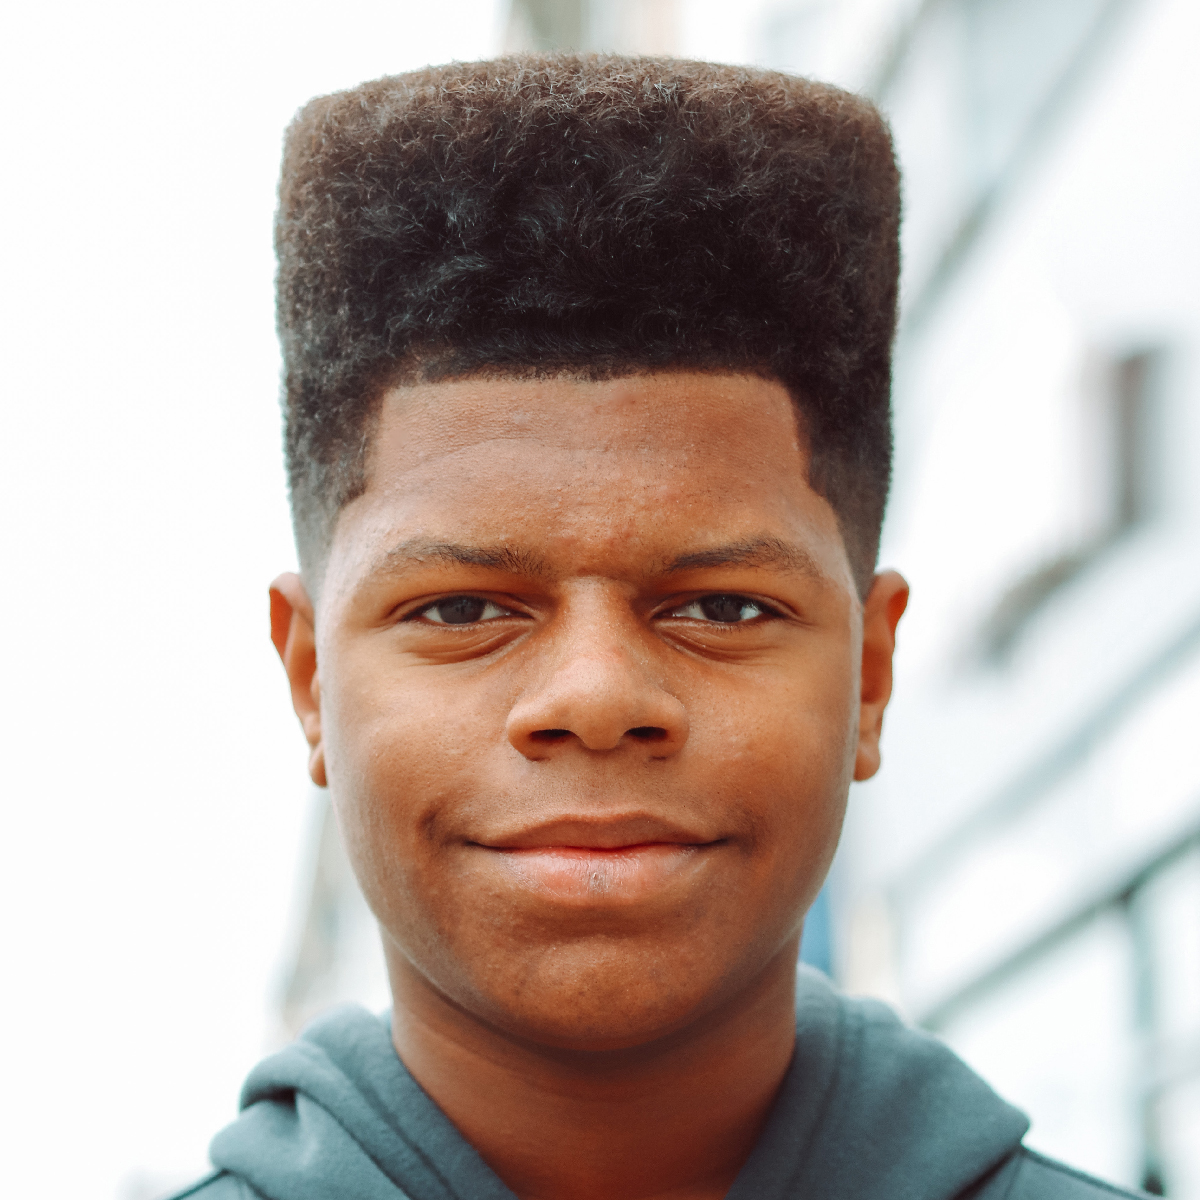 Flat Top Hairstyles For Black Men - Afroculture.net